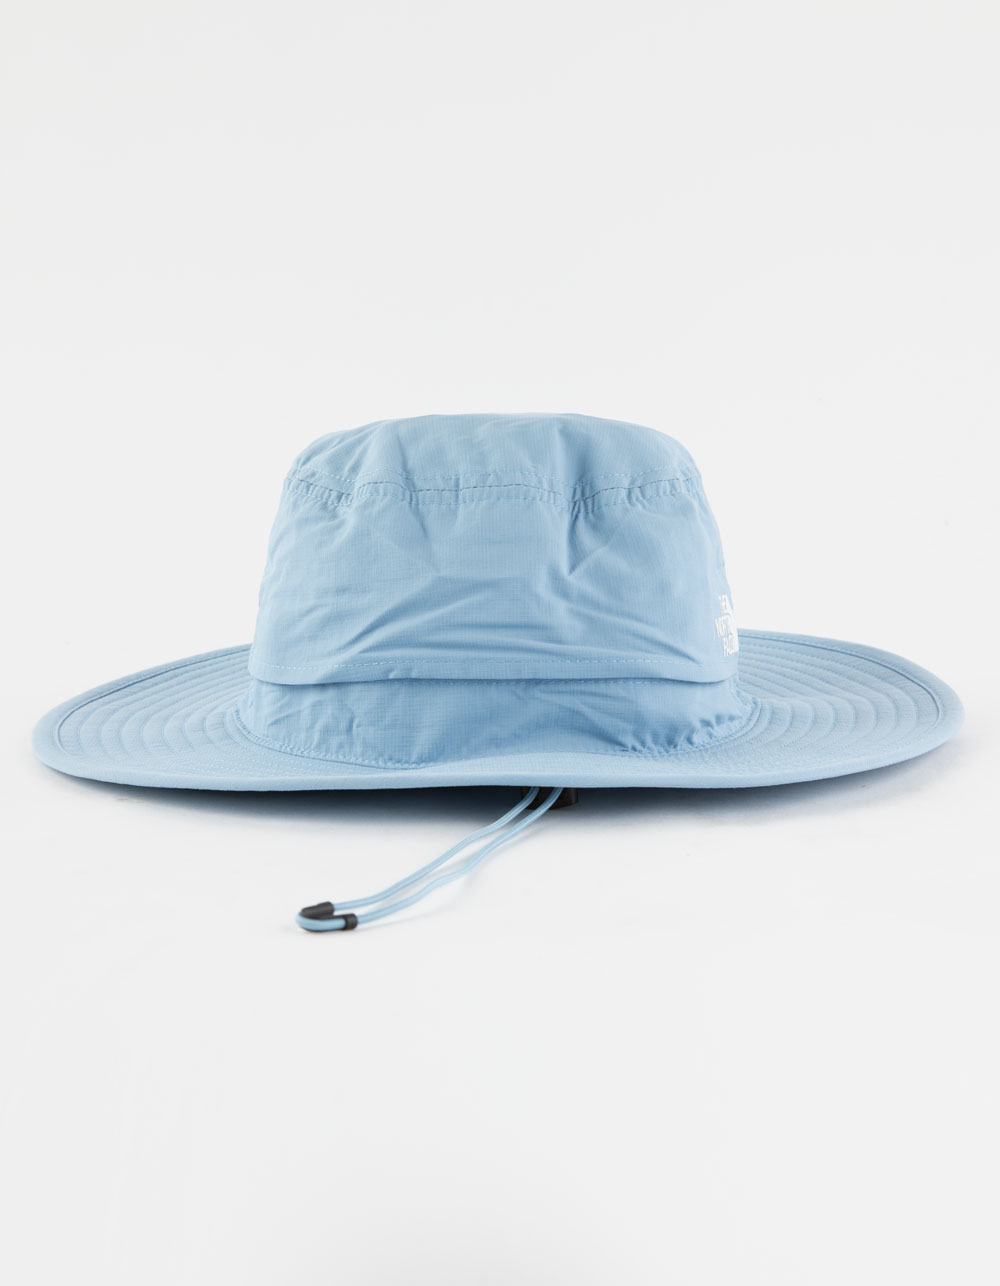 The North Face Horizon Breeze Brimmer Hat Steel Blue, S/M